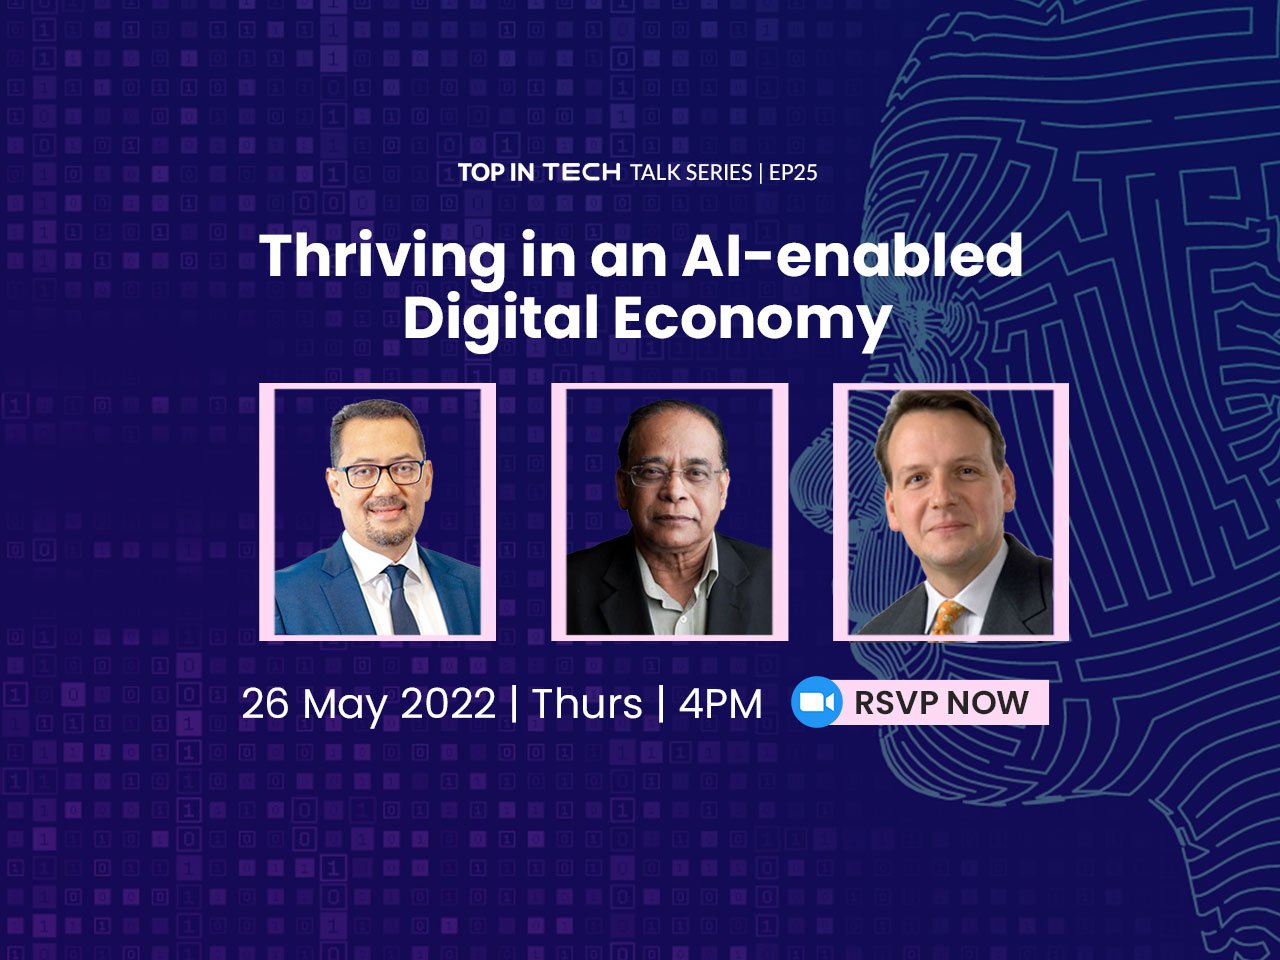 Thriving in an AI-enabled Digital Economy